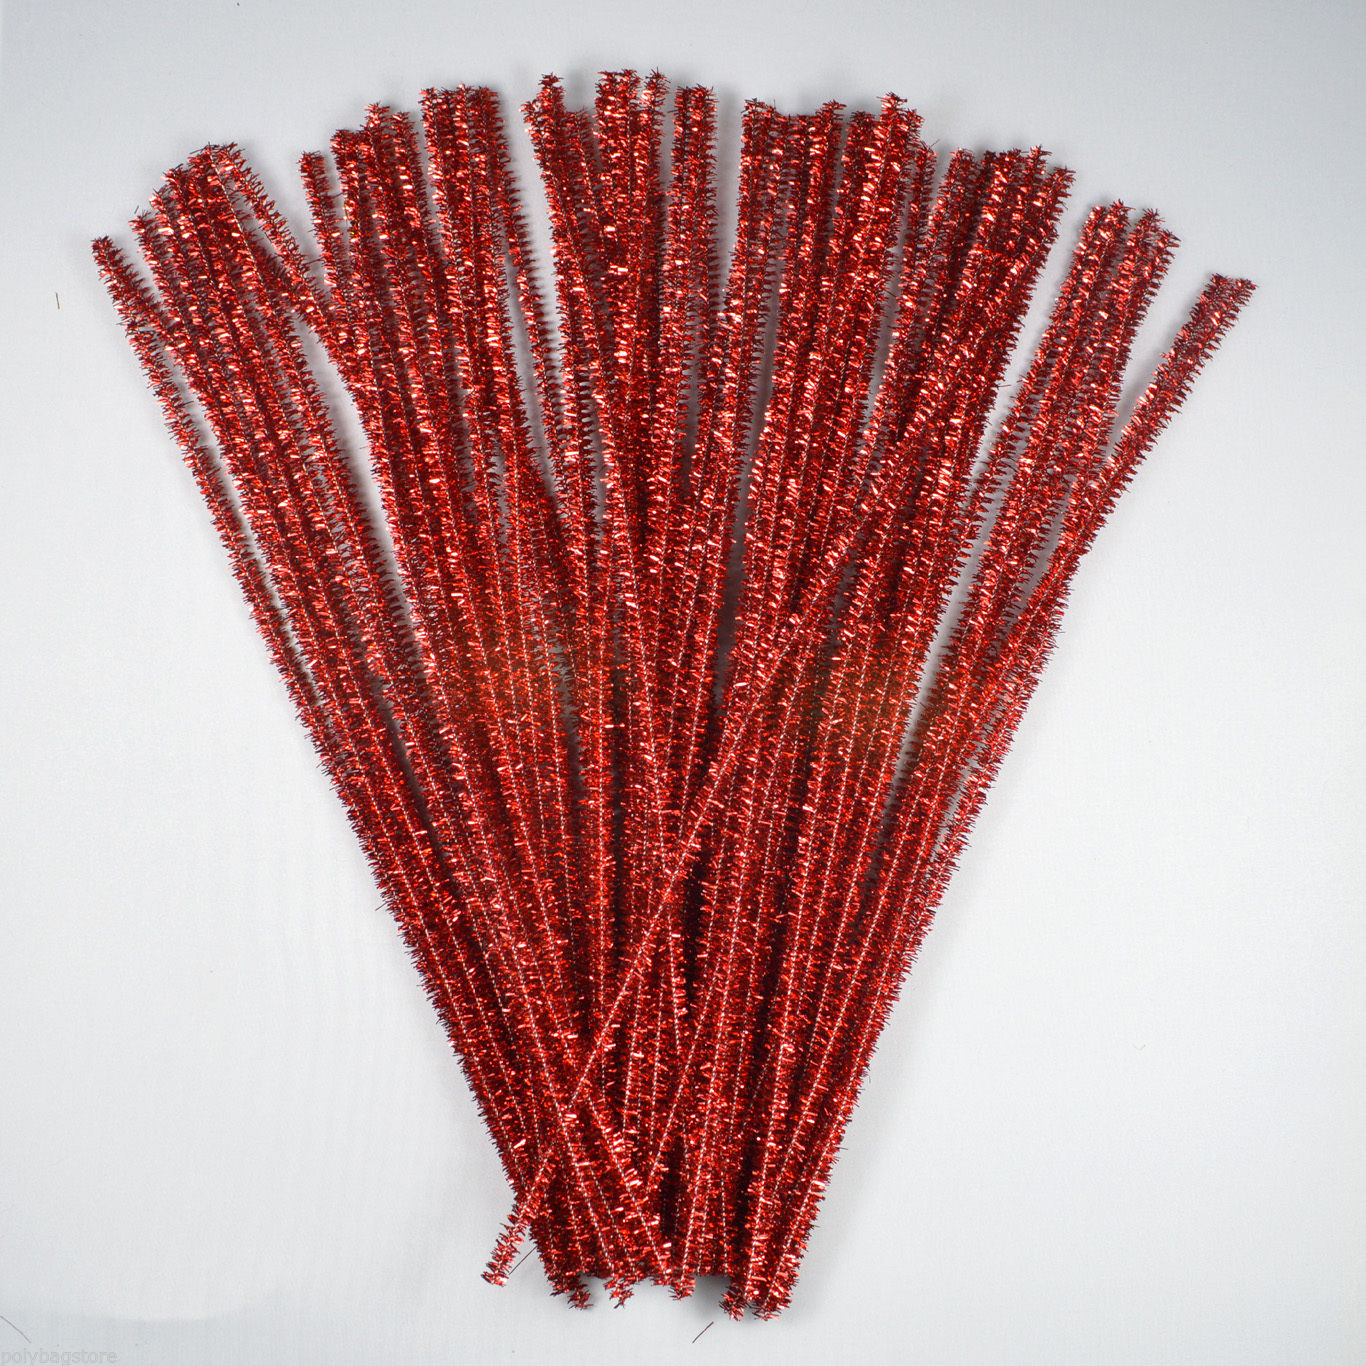 Gold and Silver Glitter Pipe Cleaners 300mm - 100 Pack